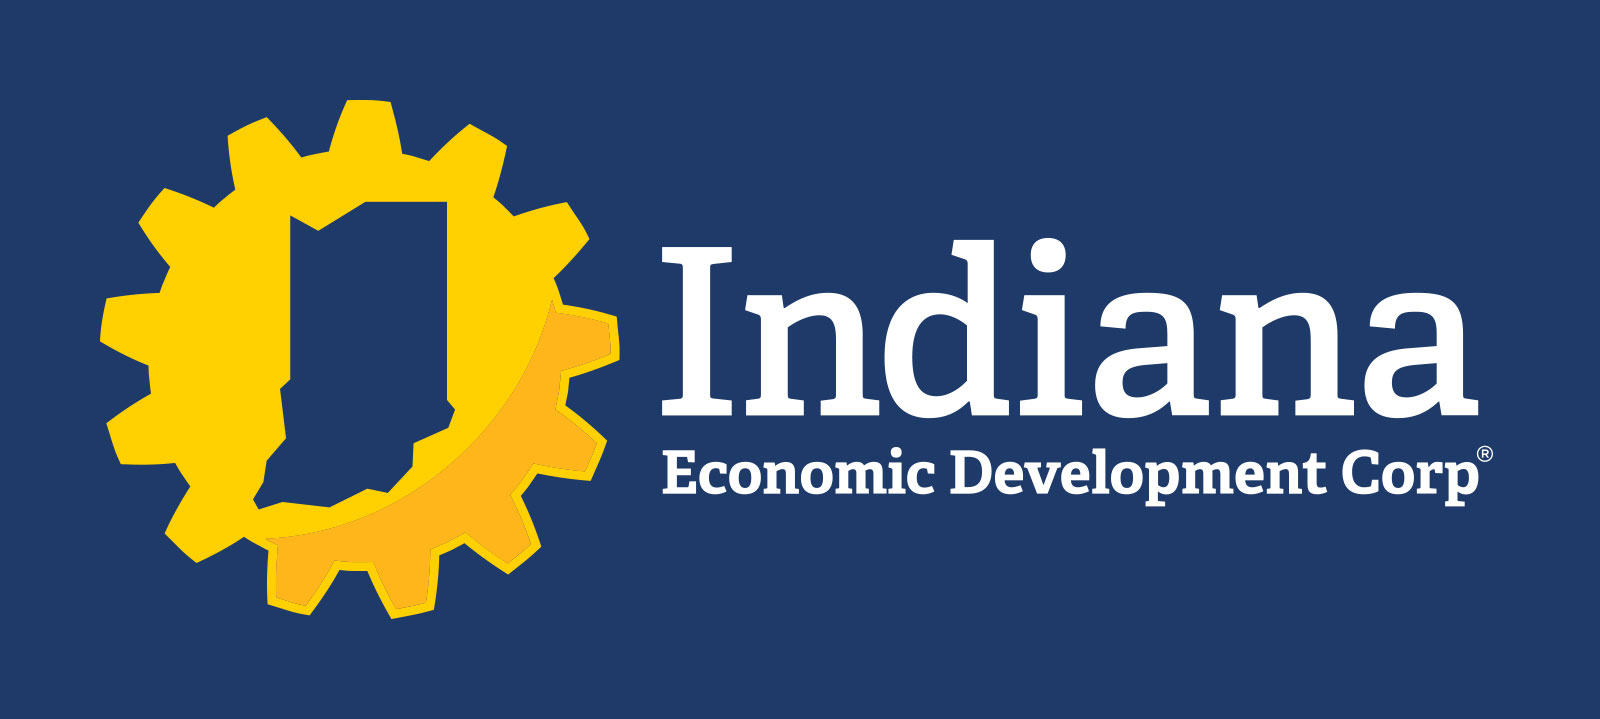 Indiana Extends Small Business Restart Grant Program, Expands Eligibility Criteria